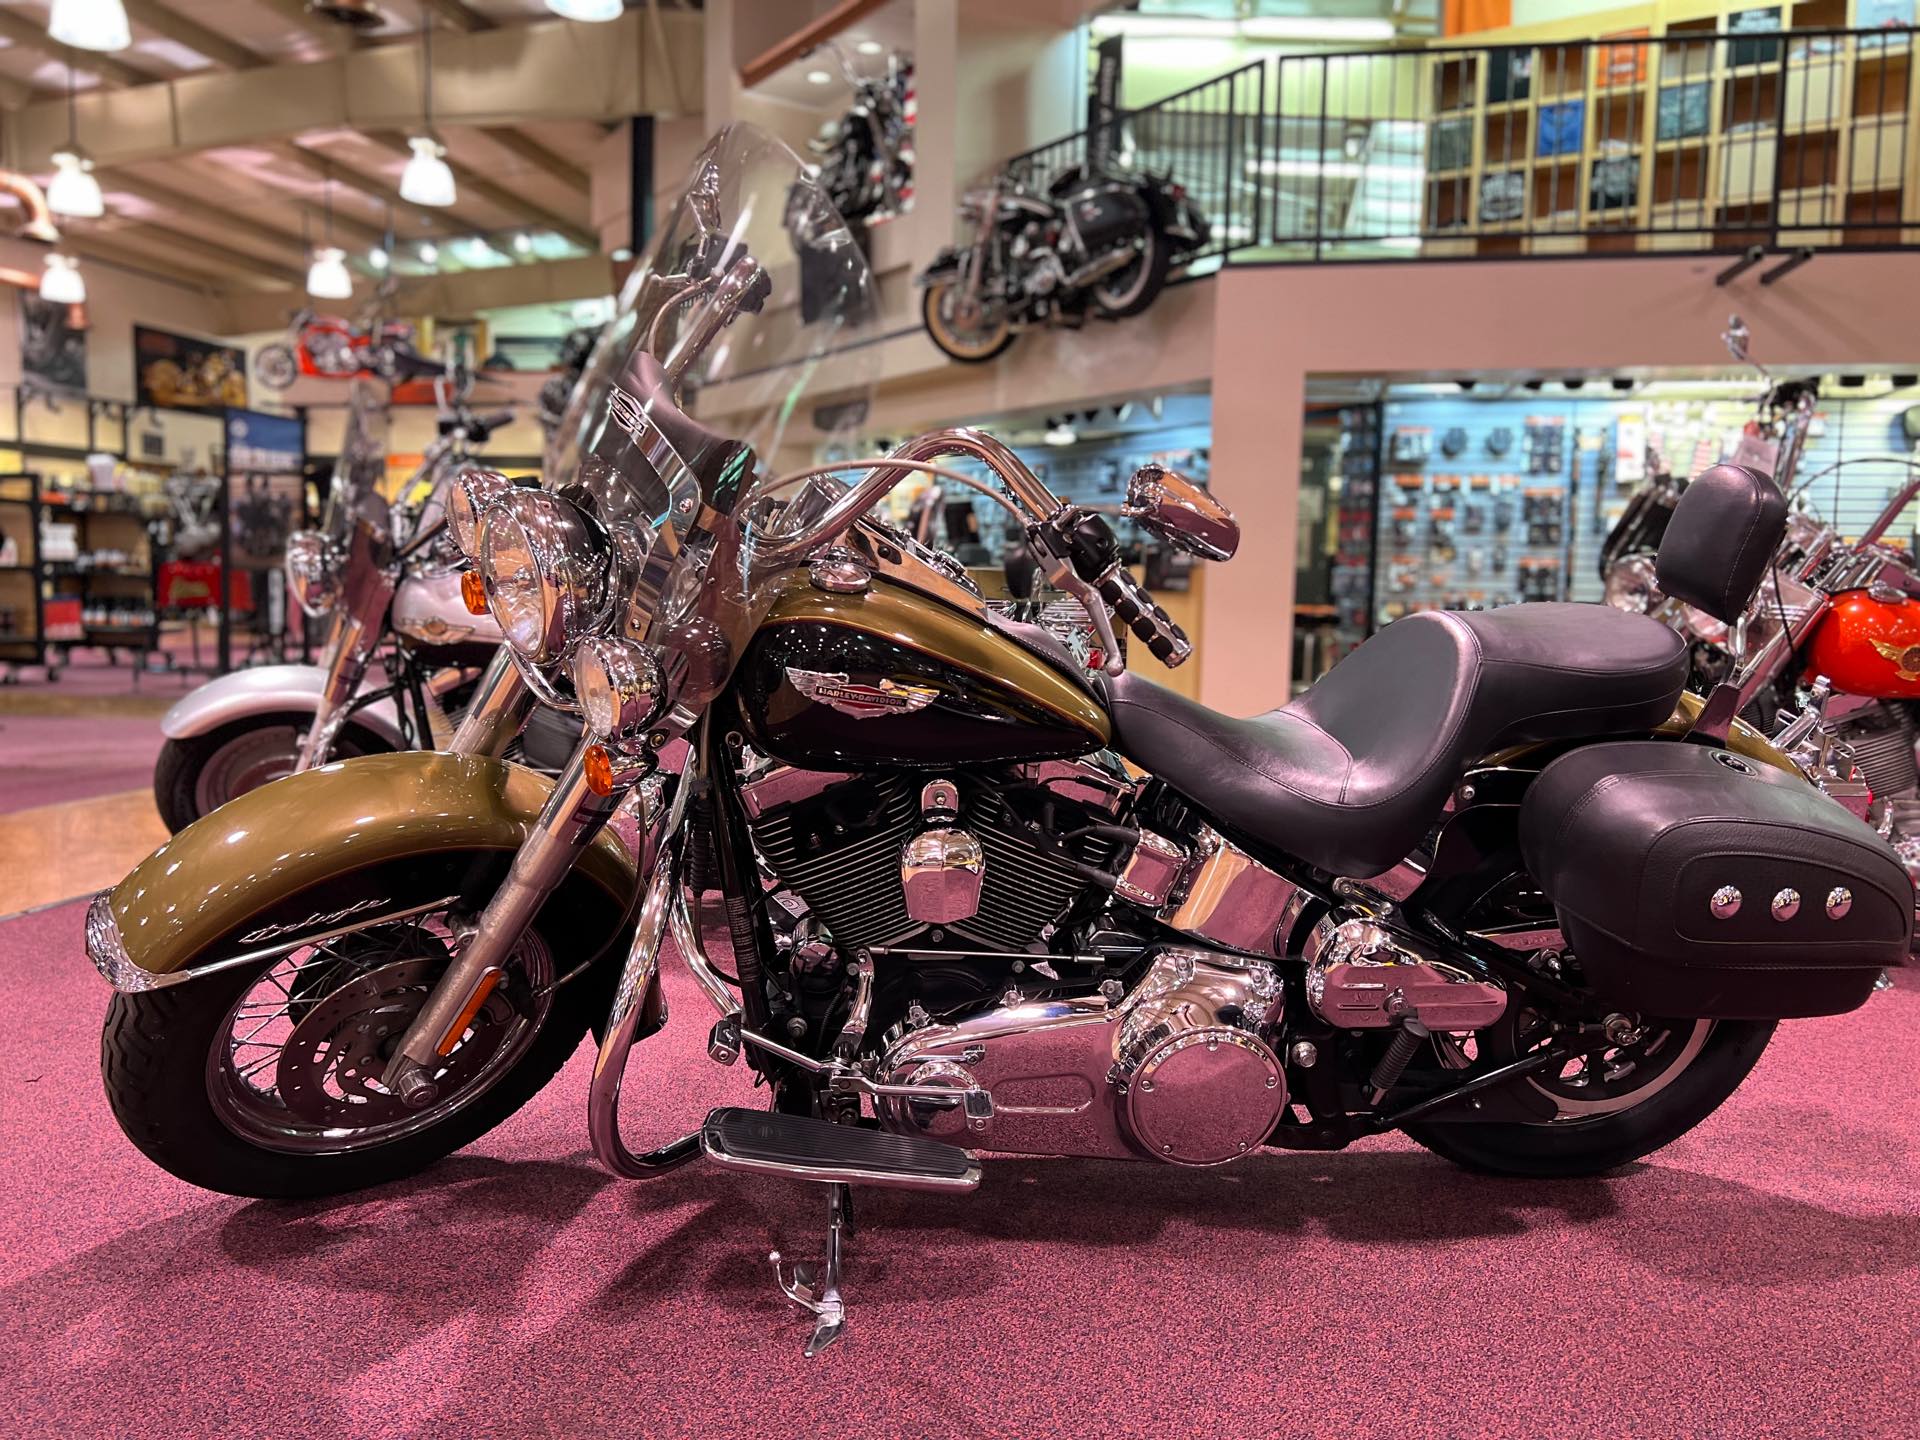 2007 Harley-Davidson Softail Deluxe at #1 Cycle Center Harley-Davidson